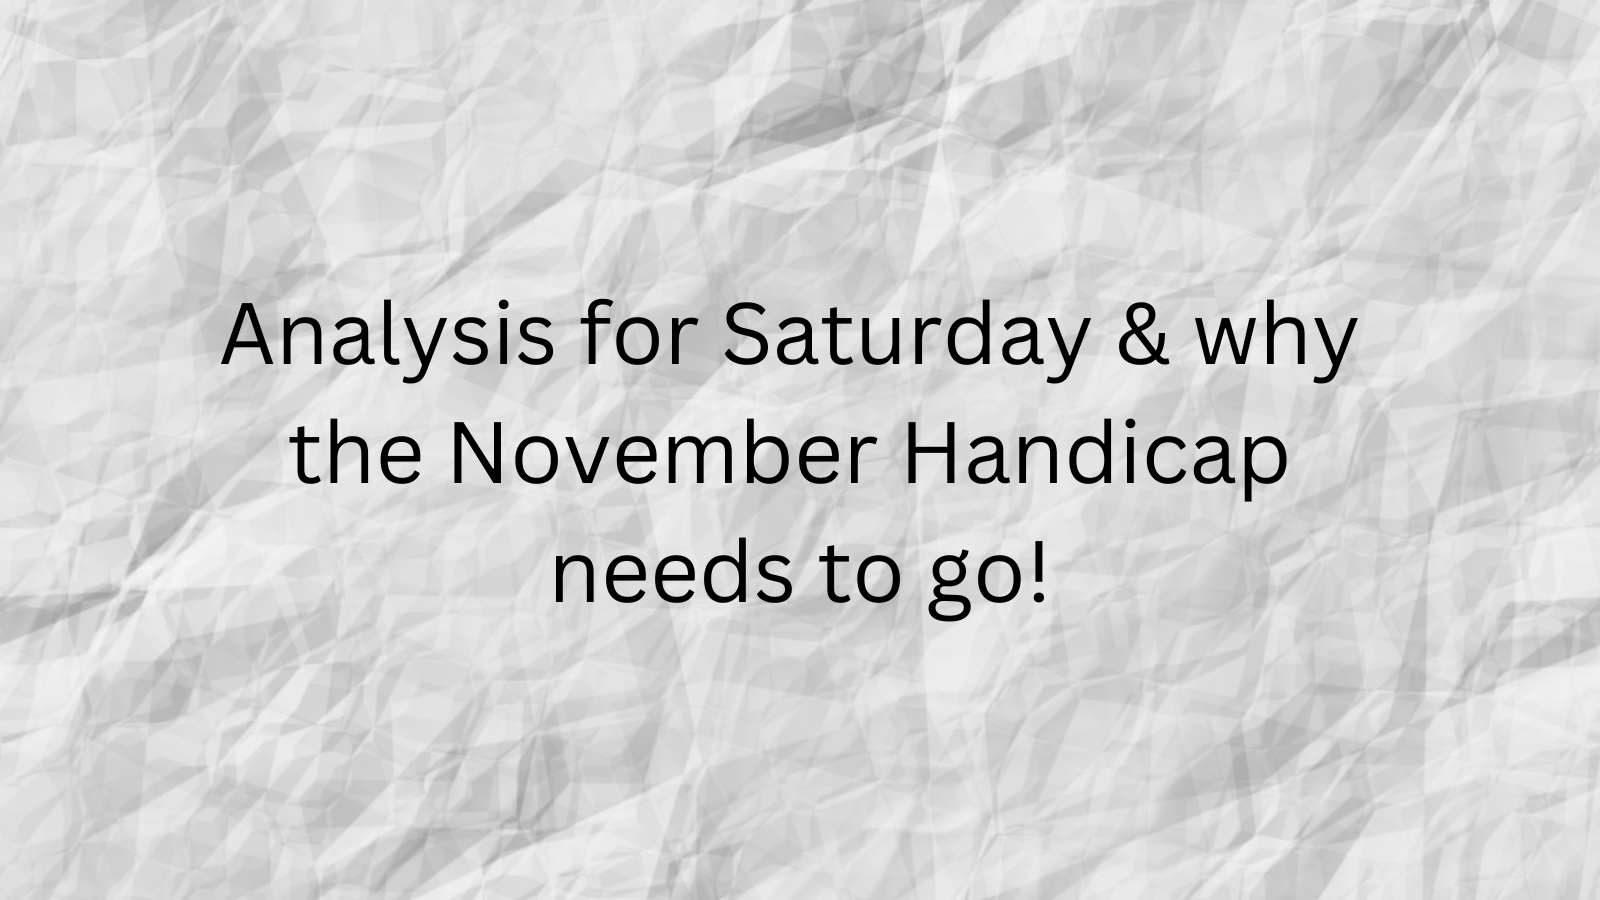 Analysis for Saturday & why the November Handicap needs to go!